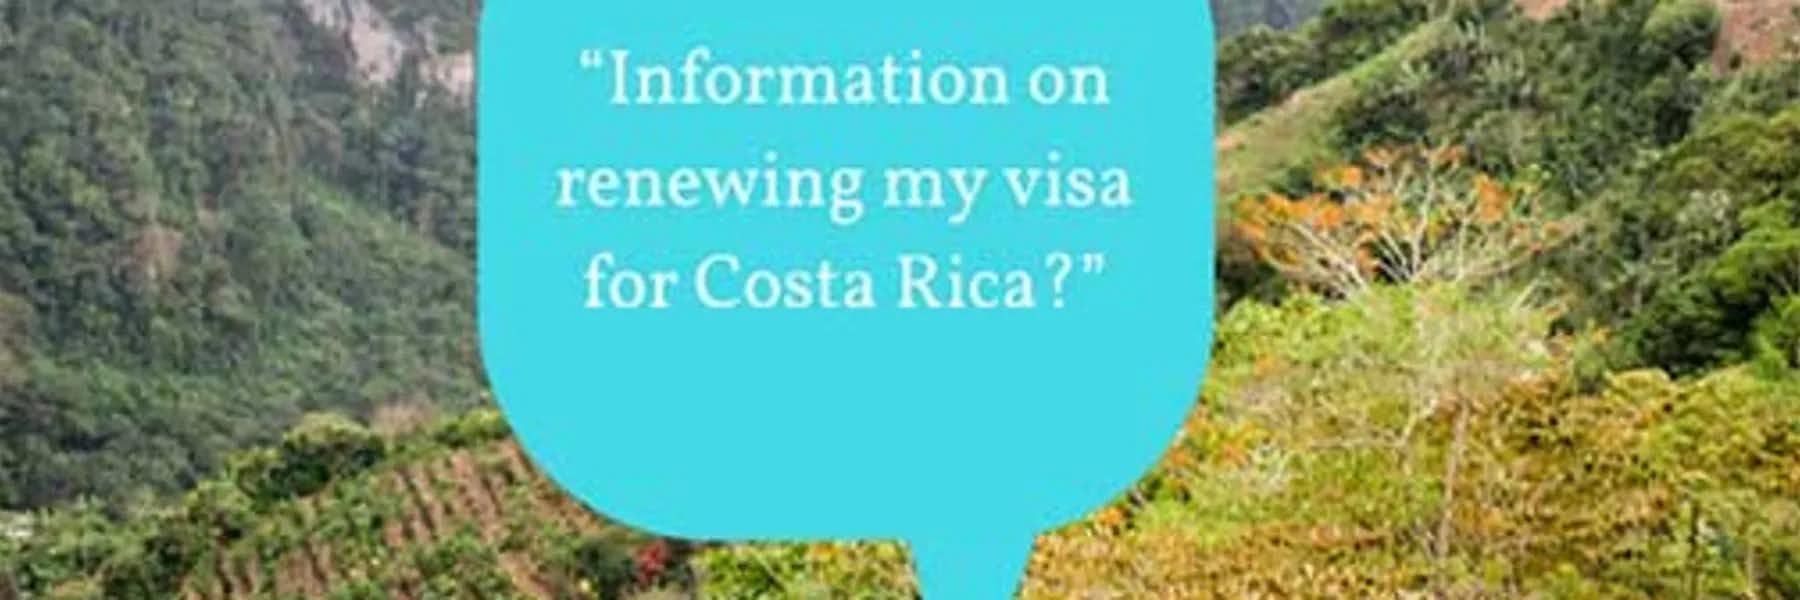 “Information on renewing my visa for Costa Rica?”